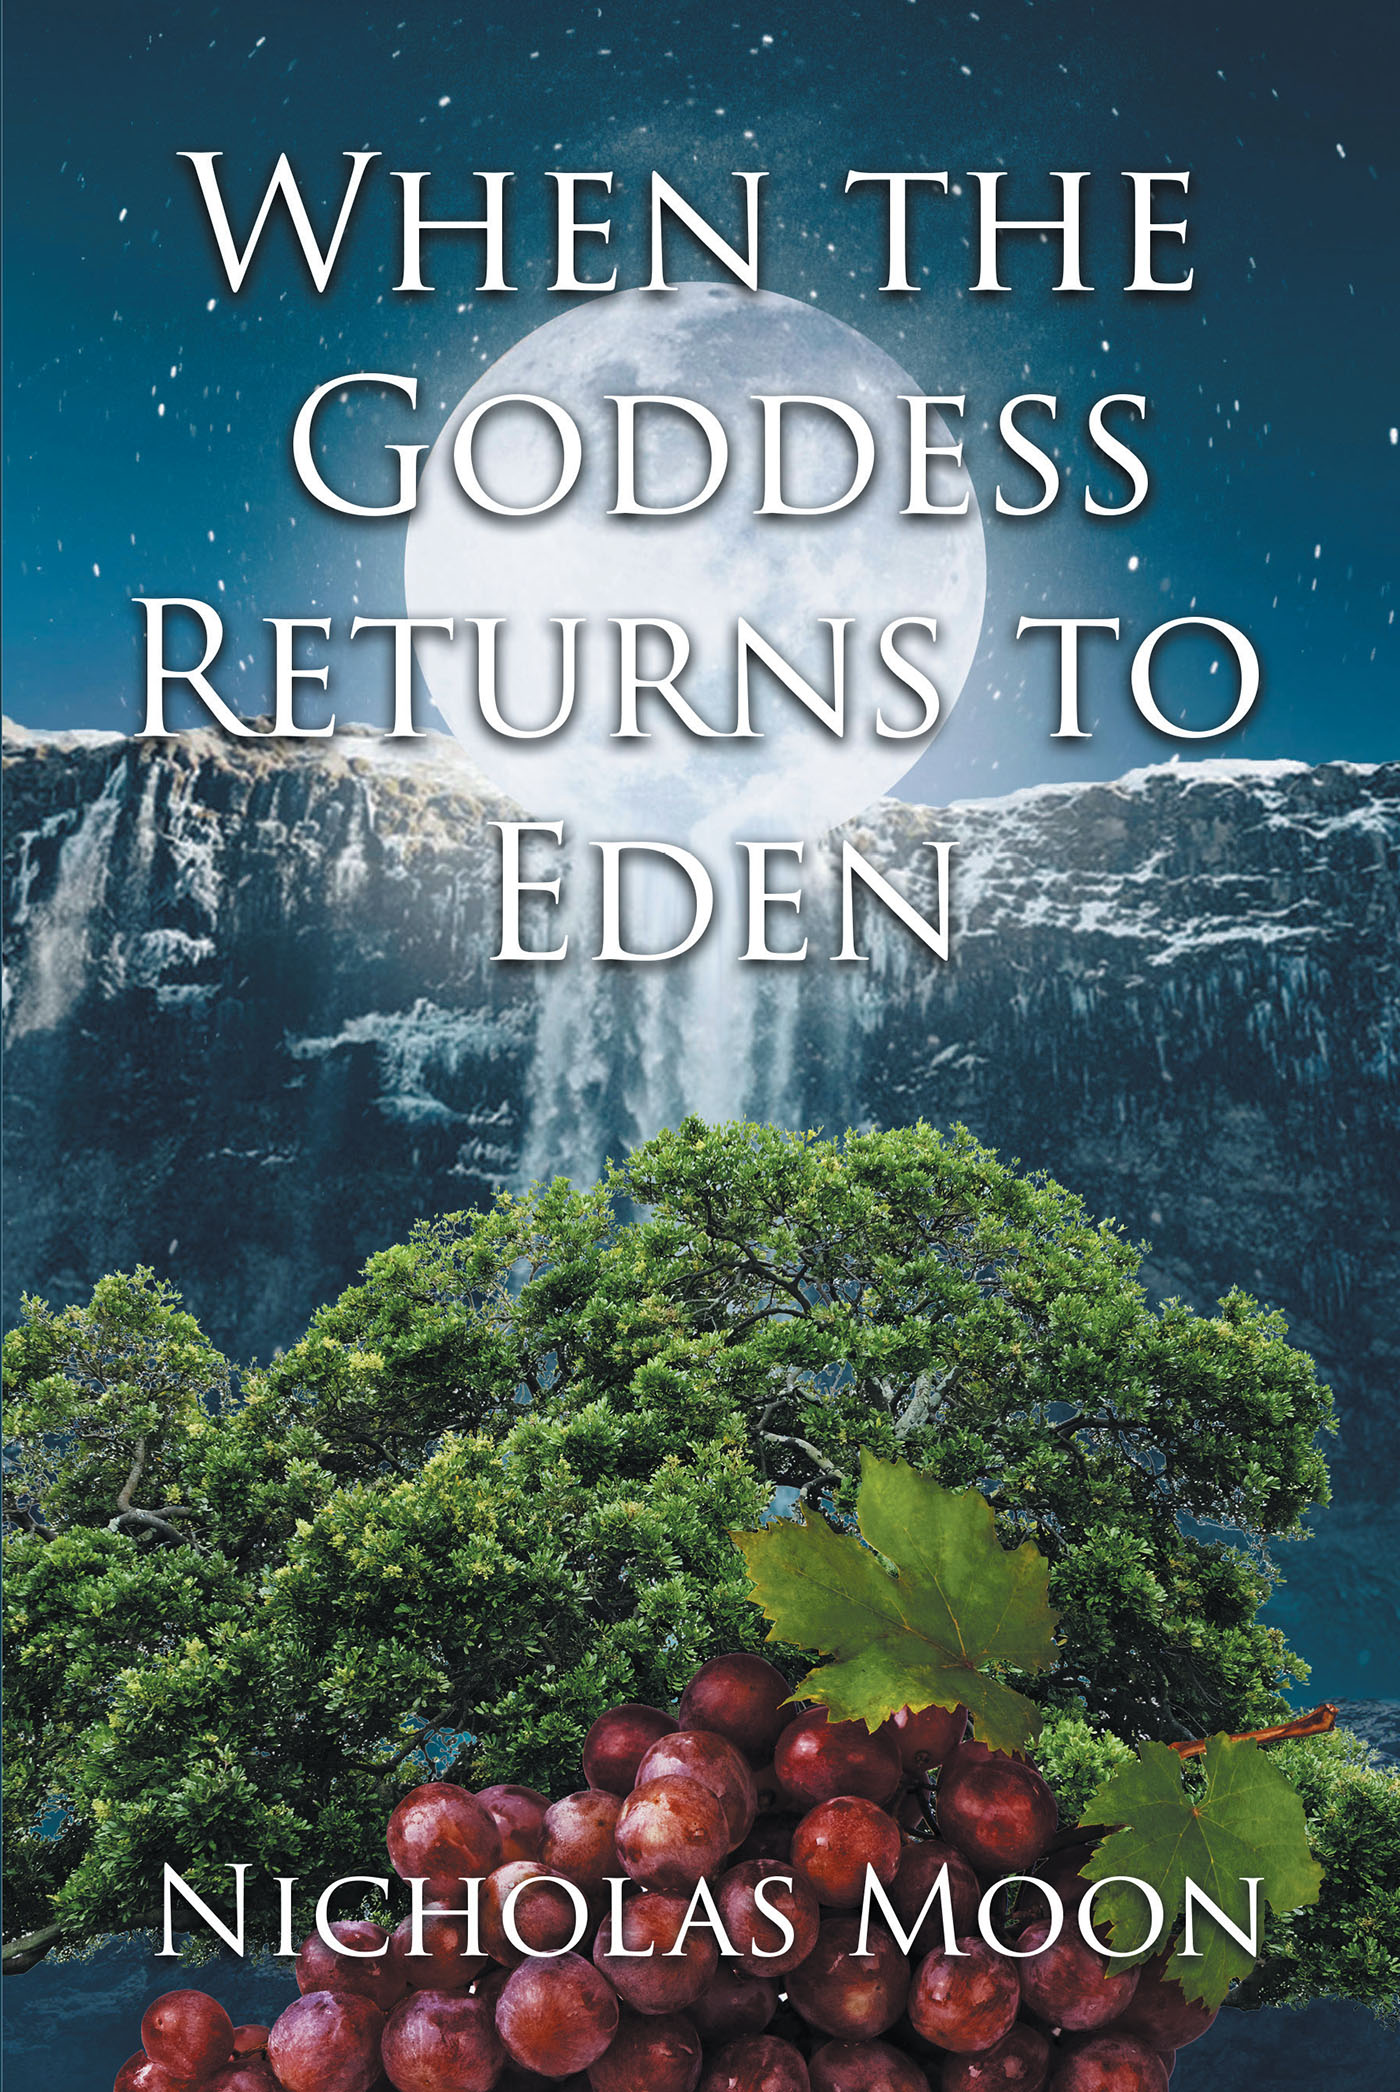 Author Nicholas Moon’s New Book, "When the Goddess Returns to Eden," is a Riveting Story of Crime and Murder Interwoven with an Ongoing Dispute Between Two Divine Beings